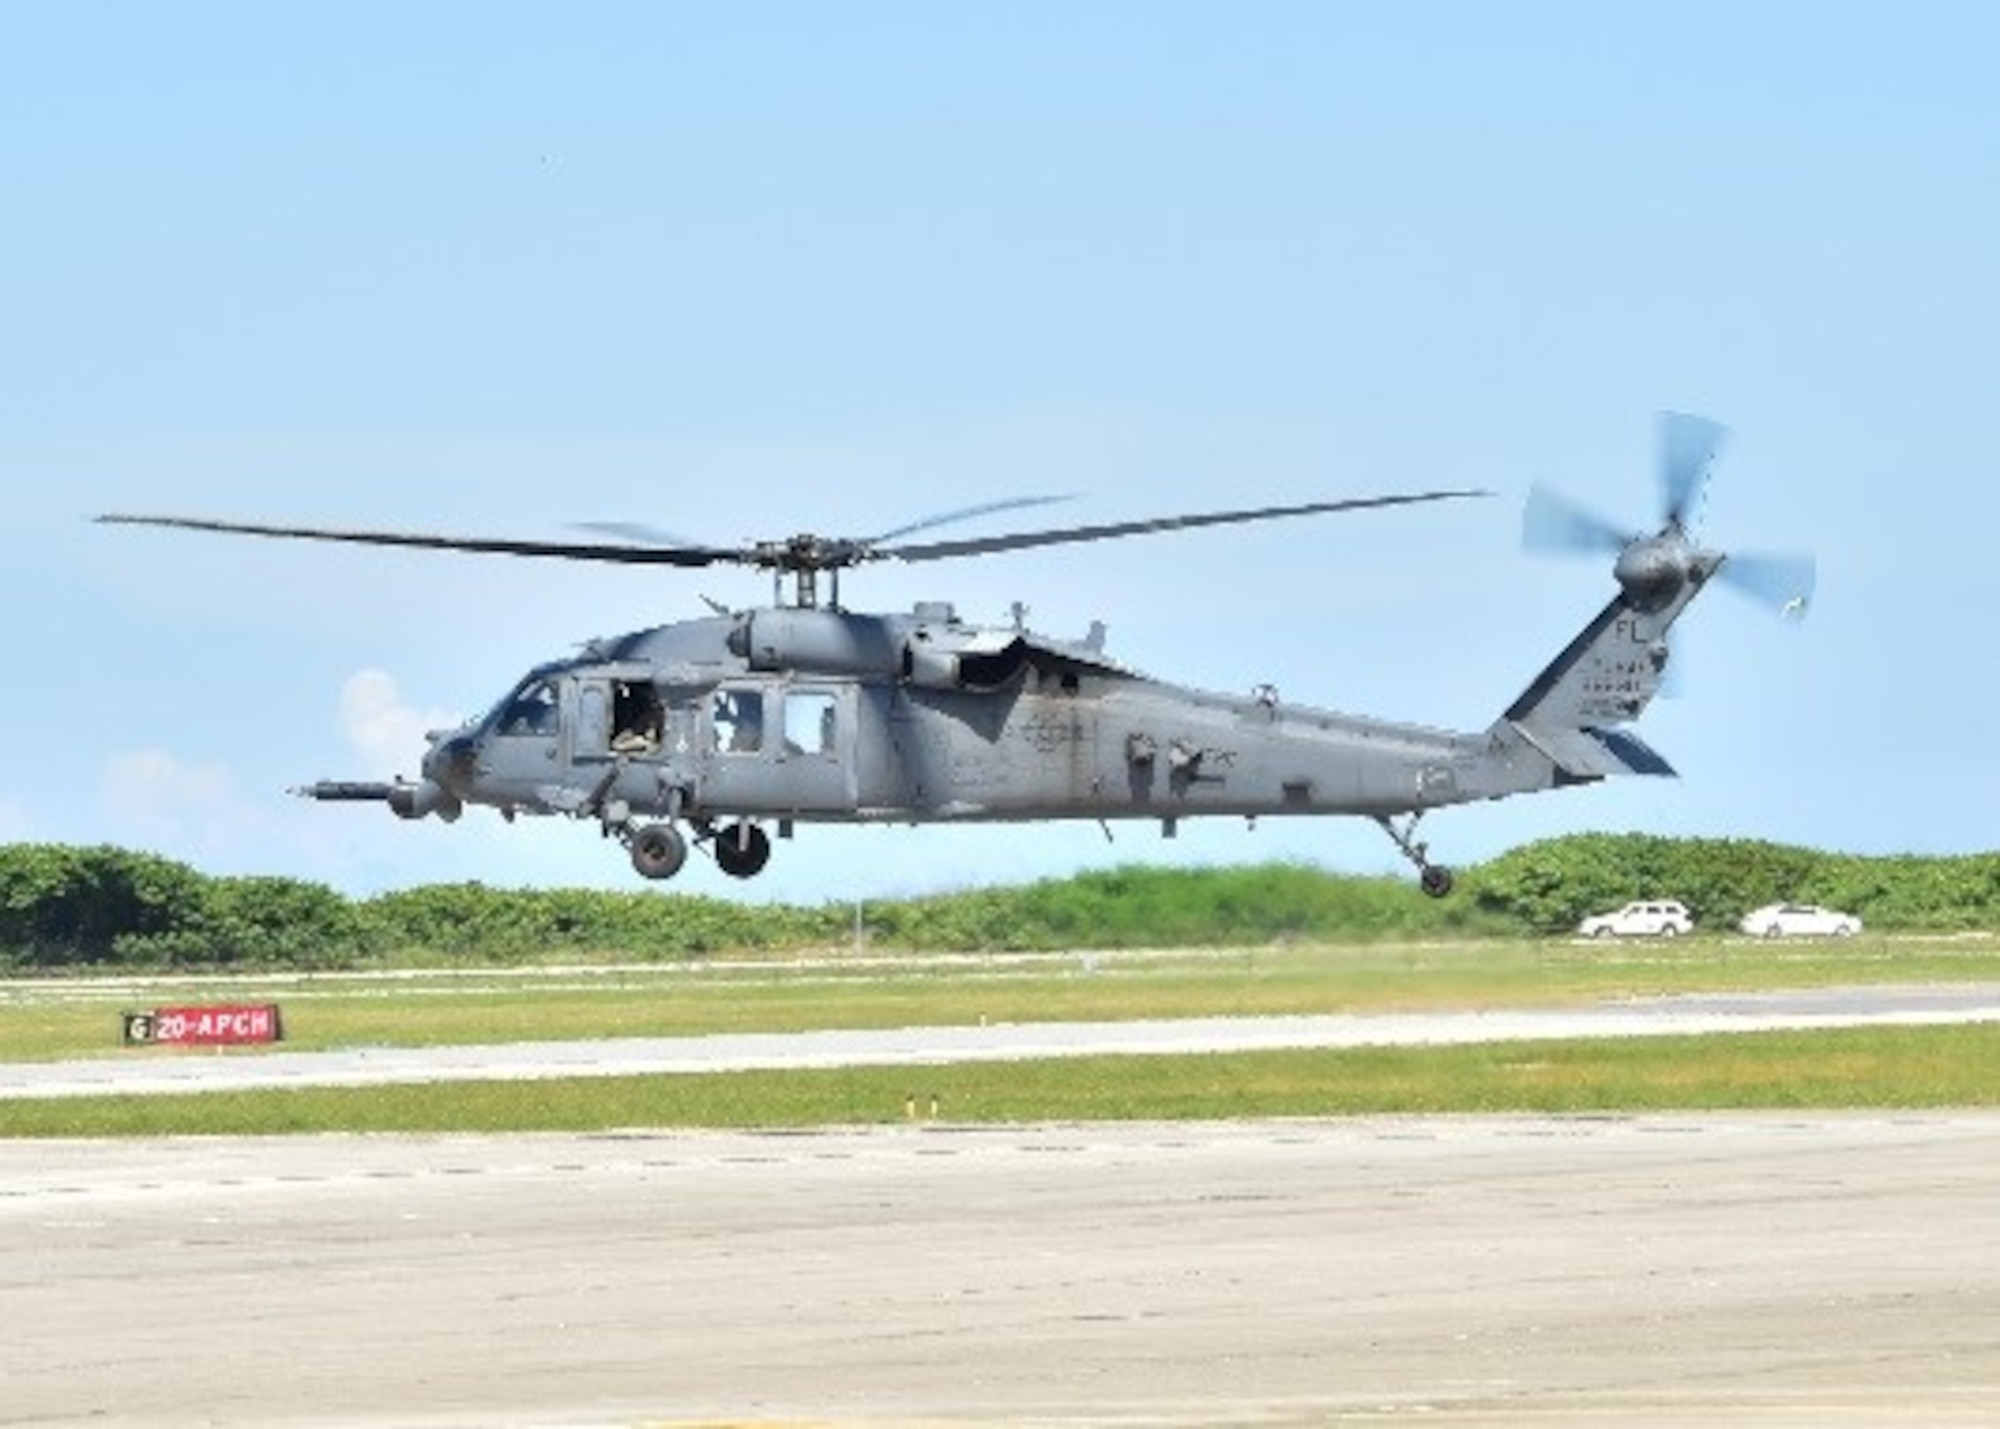 An HH-60G Pave Hawk helicopter prepares to land July 15 at Patrick Air Force Base, Fla. Citizen Airmen with the 924th Fighter Group, Davis-Monthan Air Force Base, Ariz. and the 920th Rescue Wing at Patrick AFB, are training together to perfect skills needed during combat.